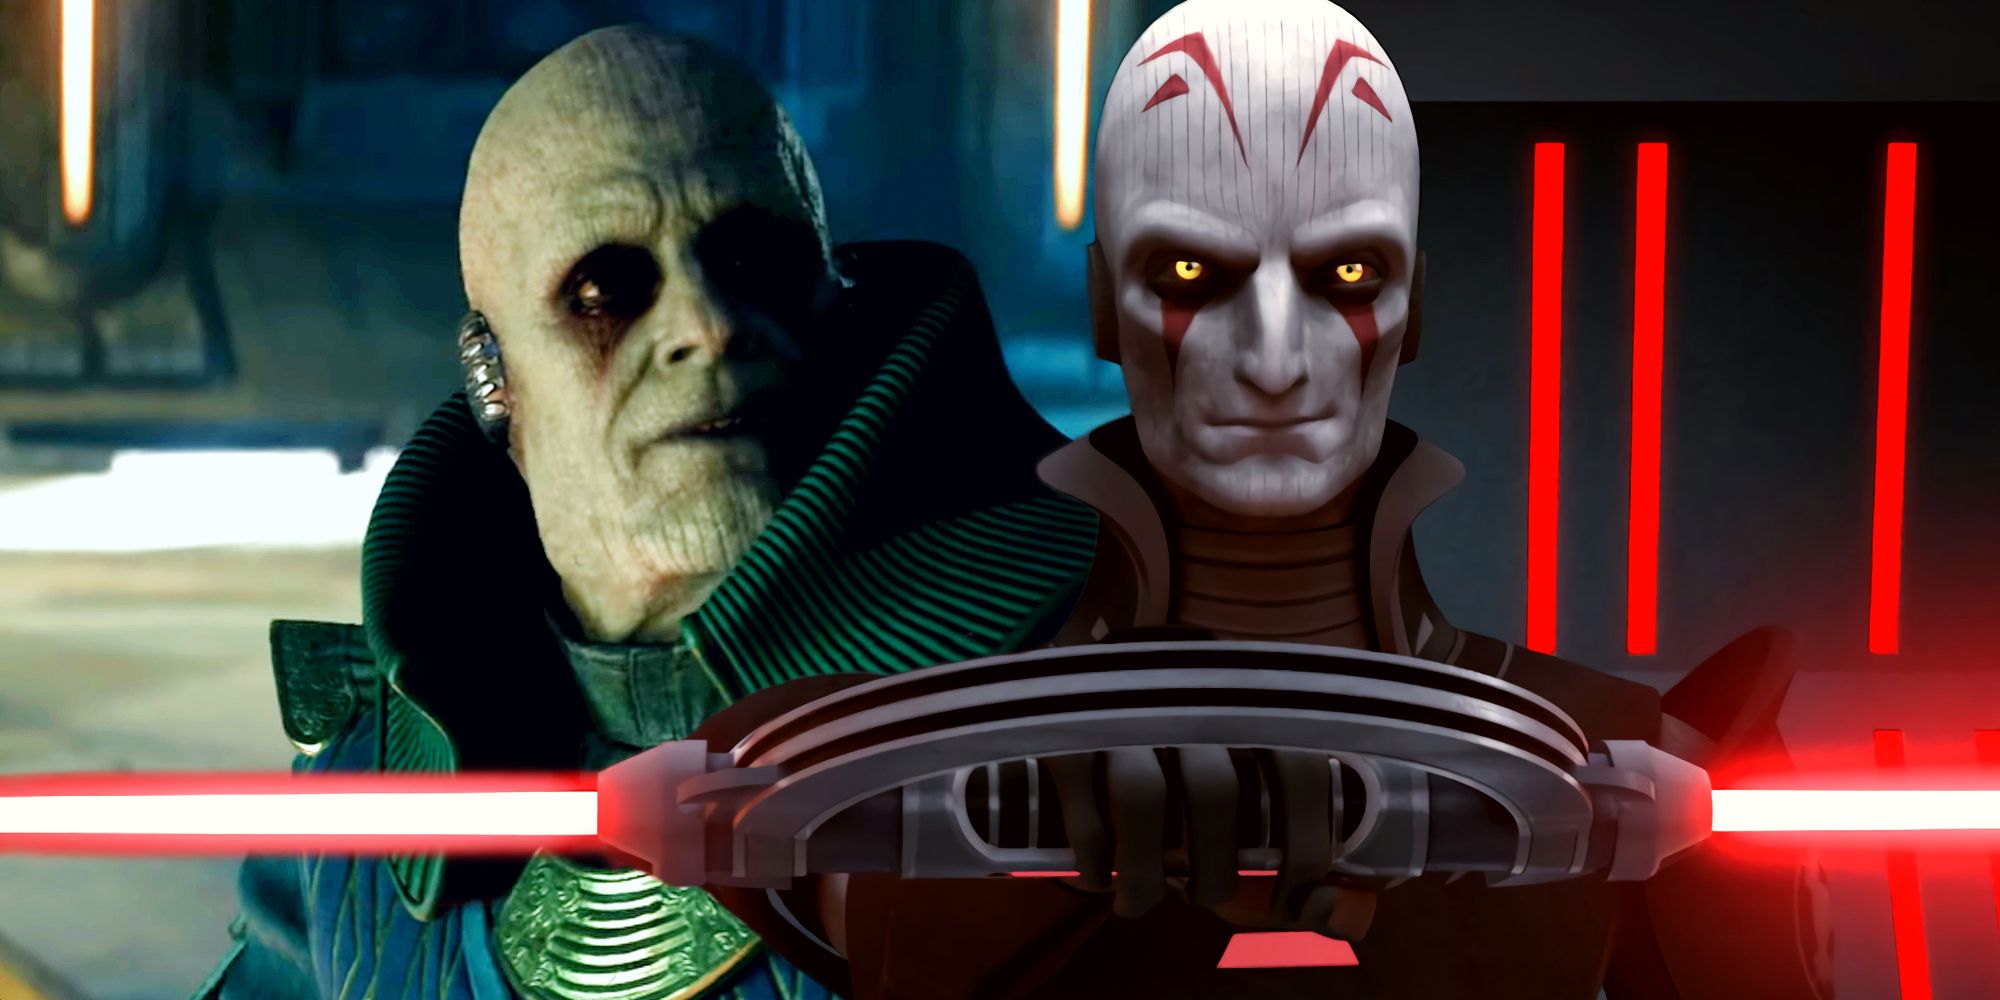 Star Wars' Grand Inquisitor with his double-bladed lightsaber ignited in front of Senator Sejan from Jedi: Survivor.